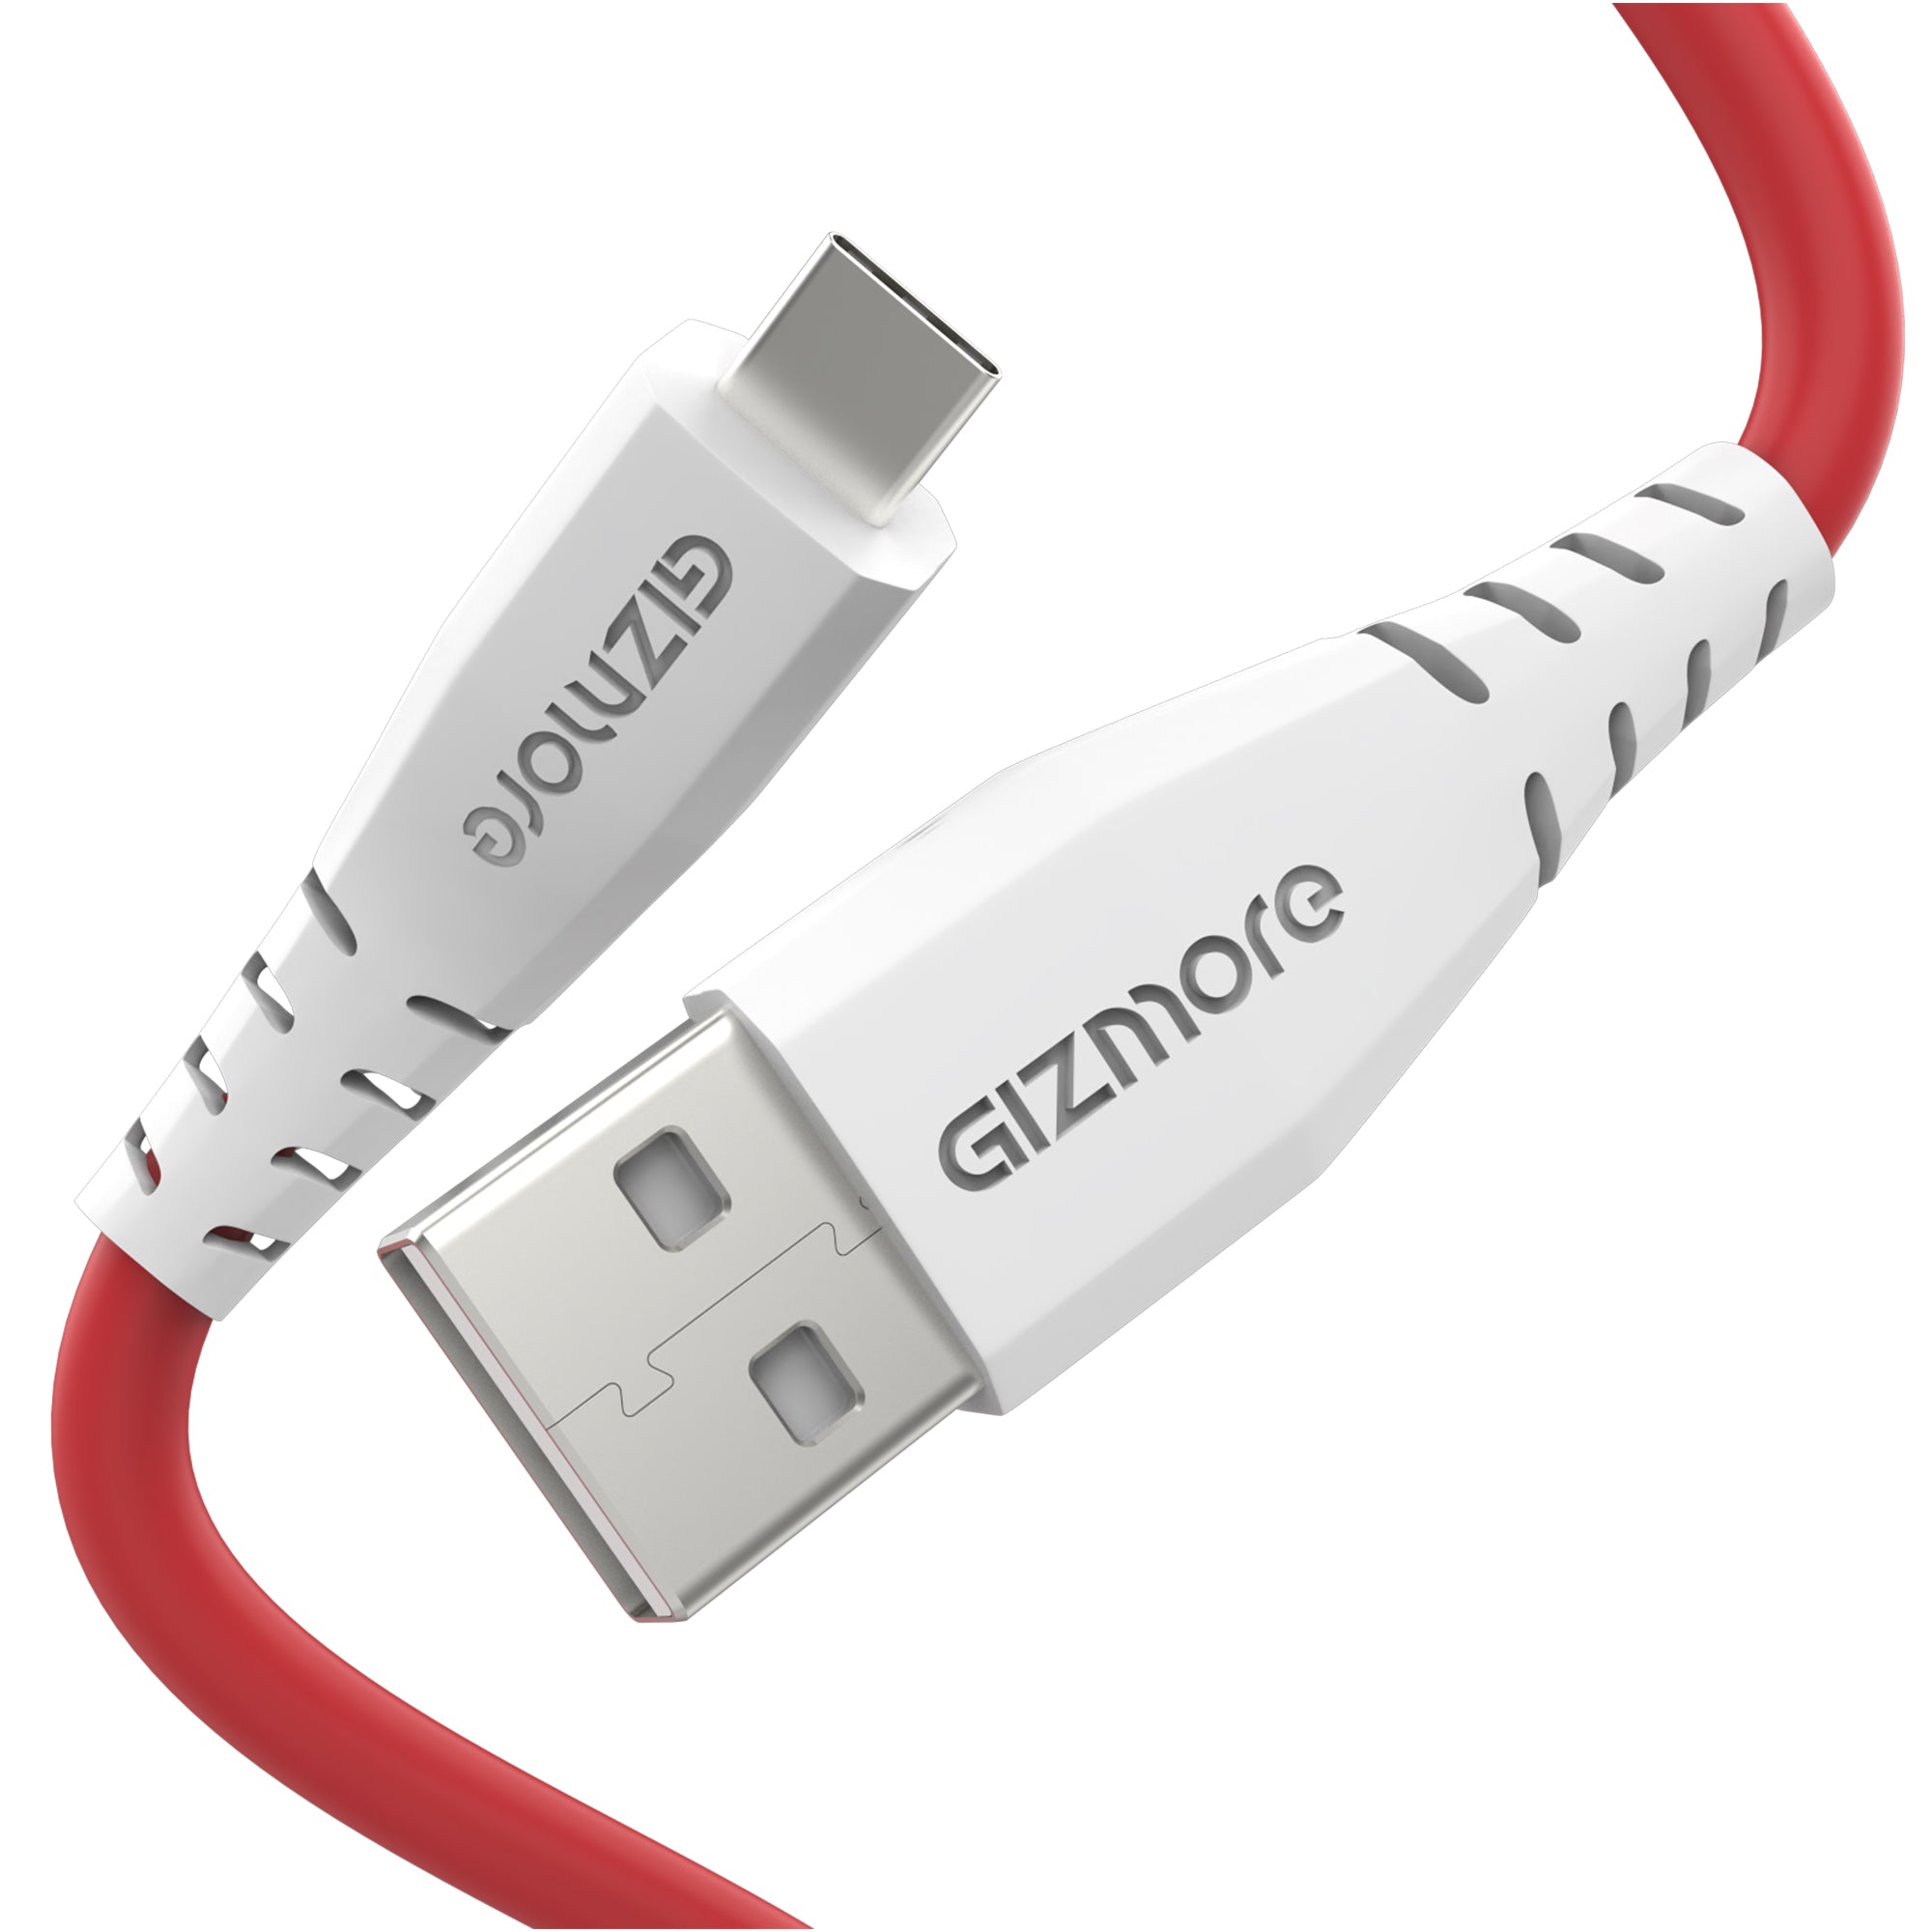 Gizmore WDC151 USB to Type C Fast Carging Cable